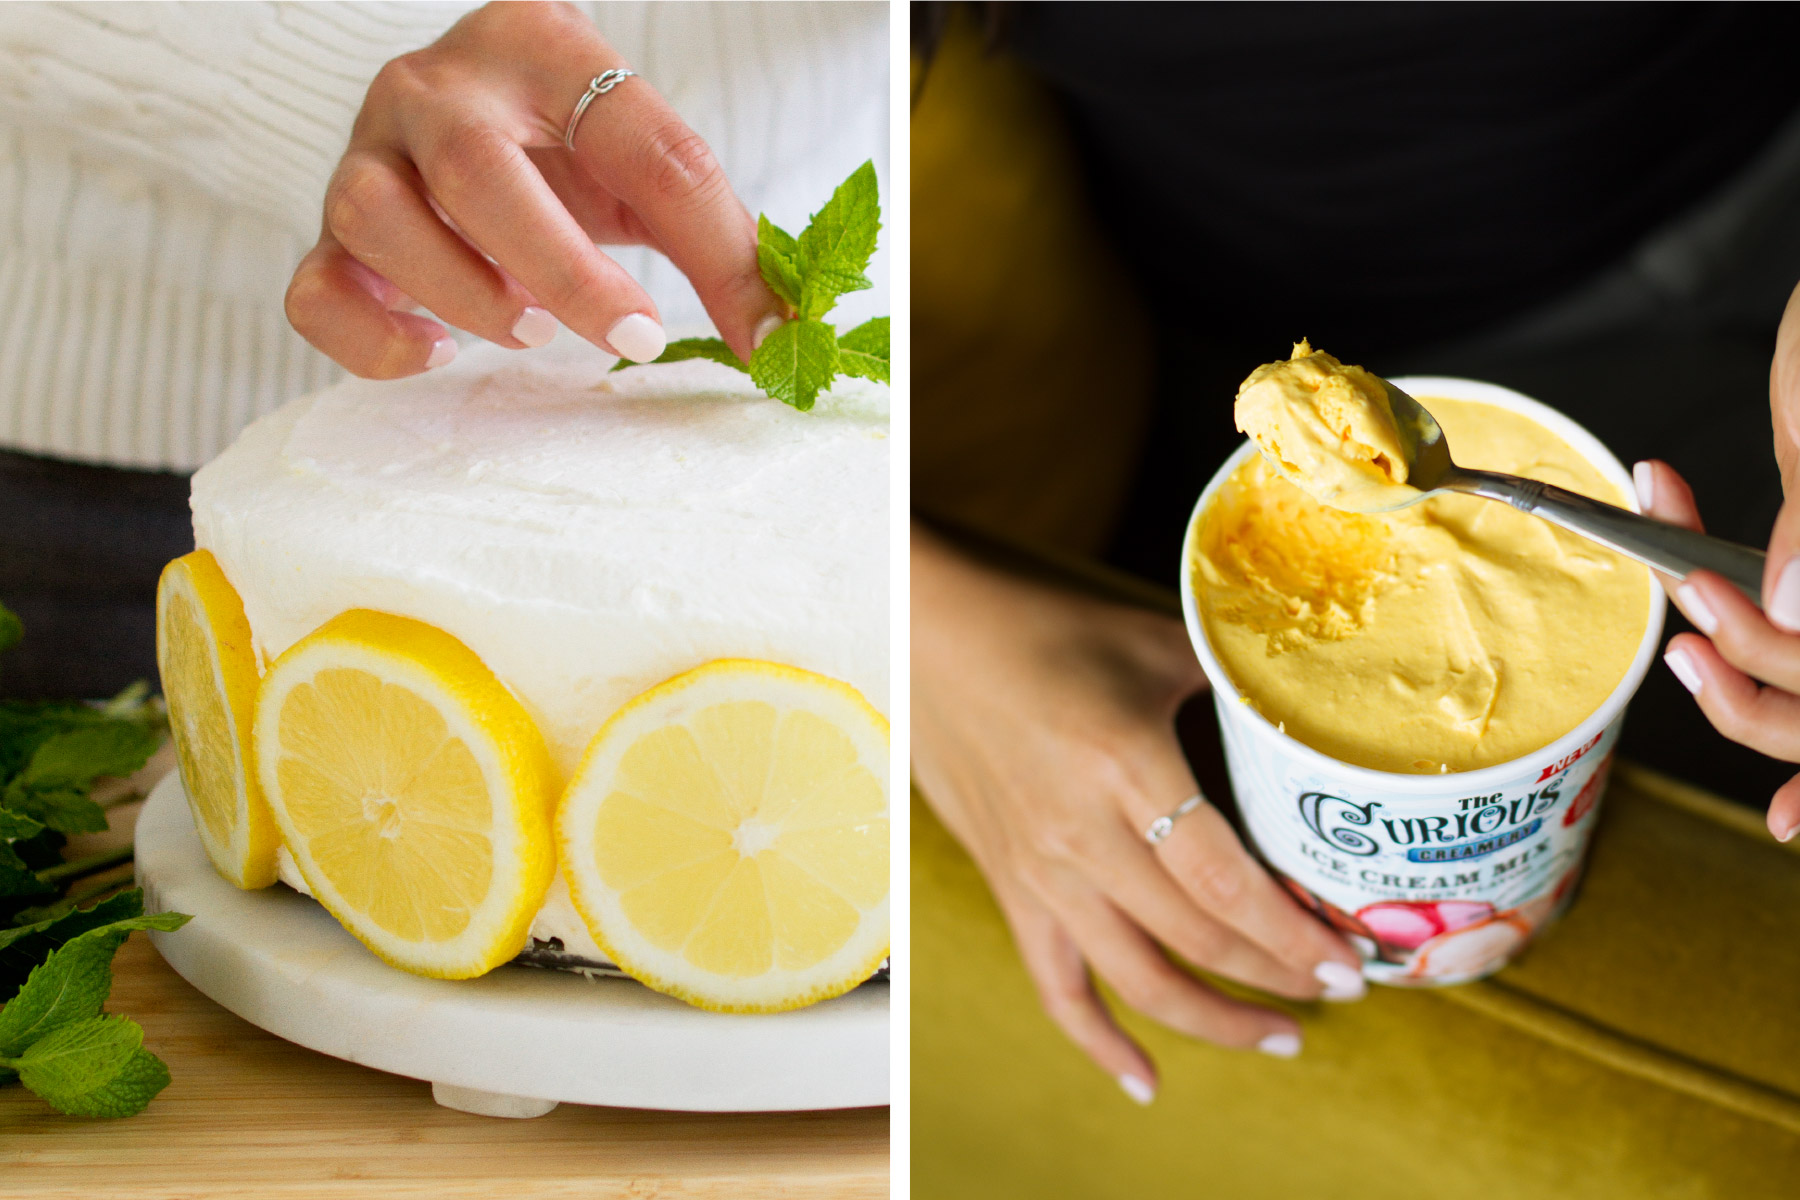 Fuze-Branding-Curious-Creamery-DIY-Lemon-Mint-Ice-Cream-Cake-Mixing-Container-Finished-Product-Lifestyle-Product-Photography